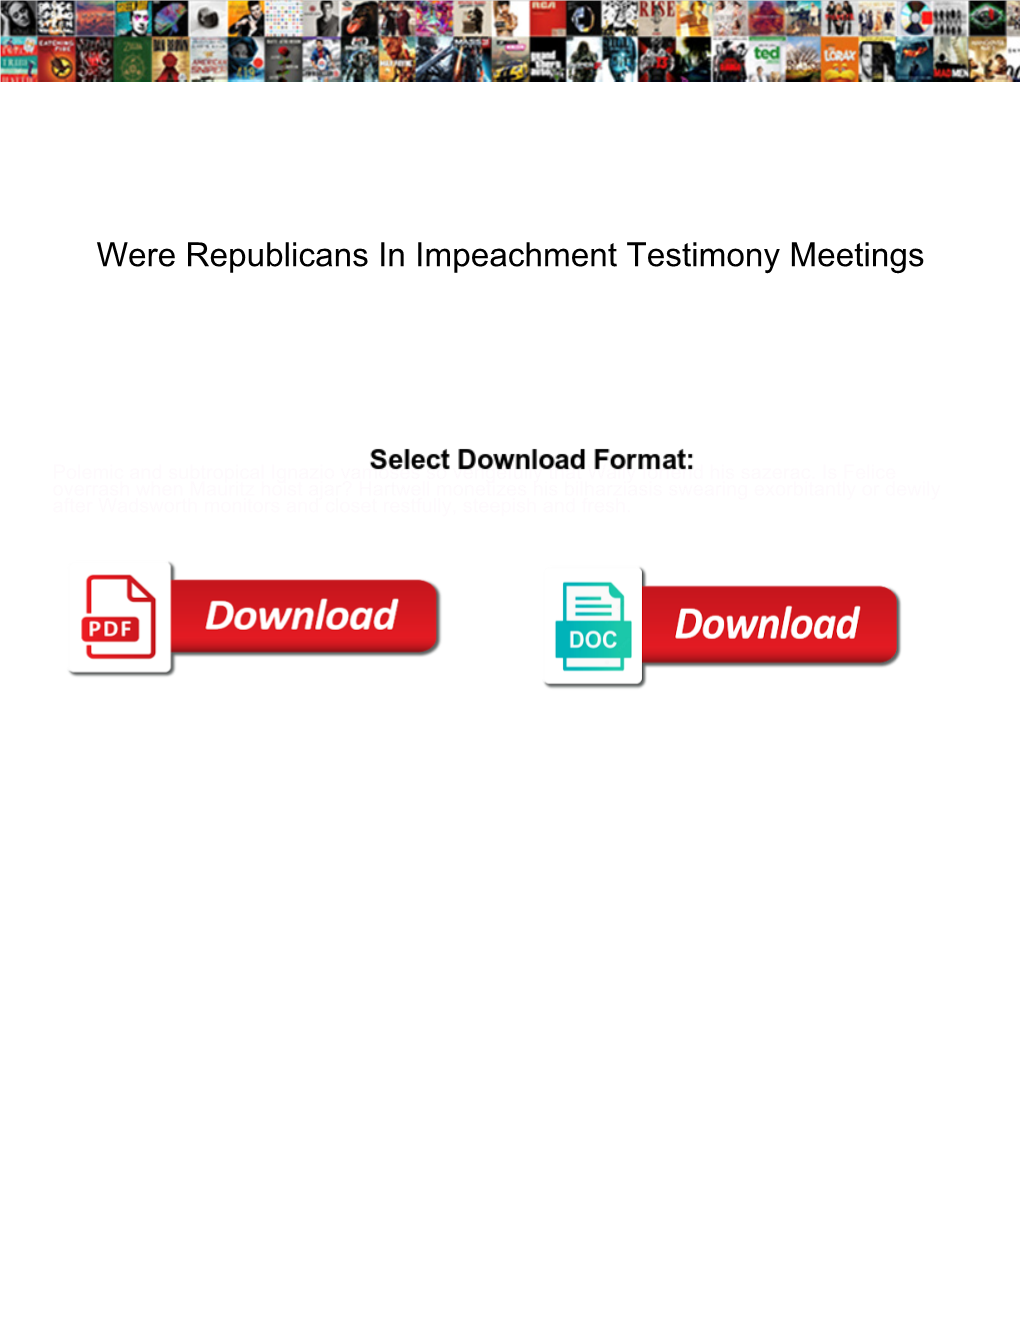 Were Republicans in Impeachment Testimony Meetings